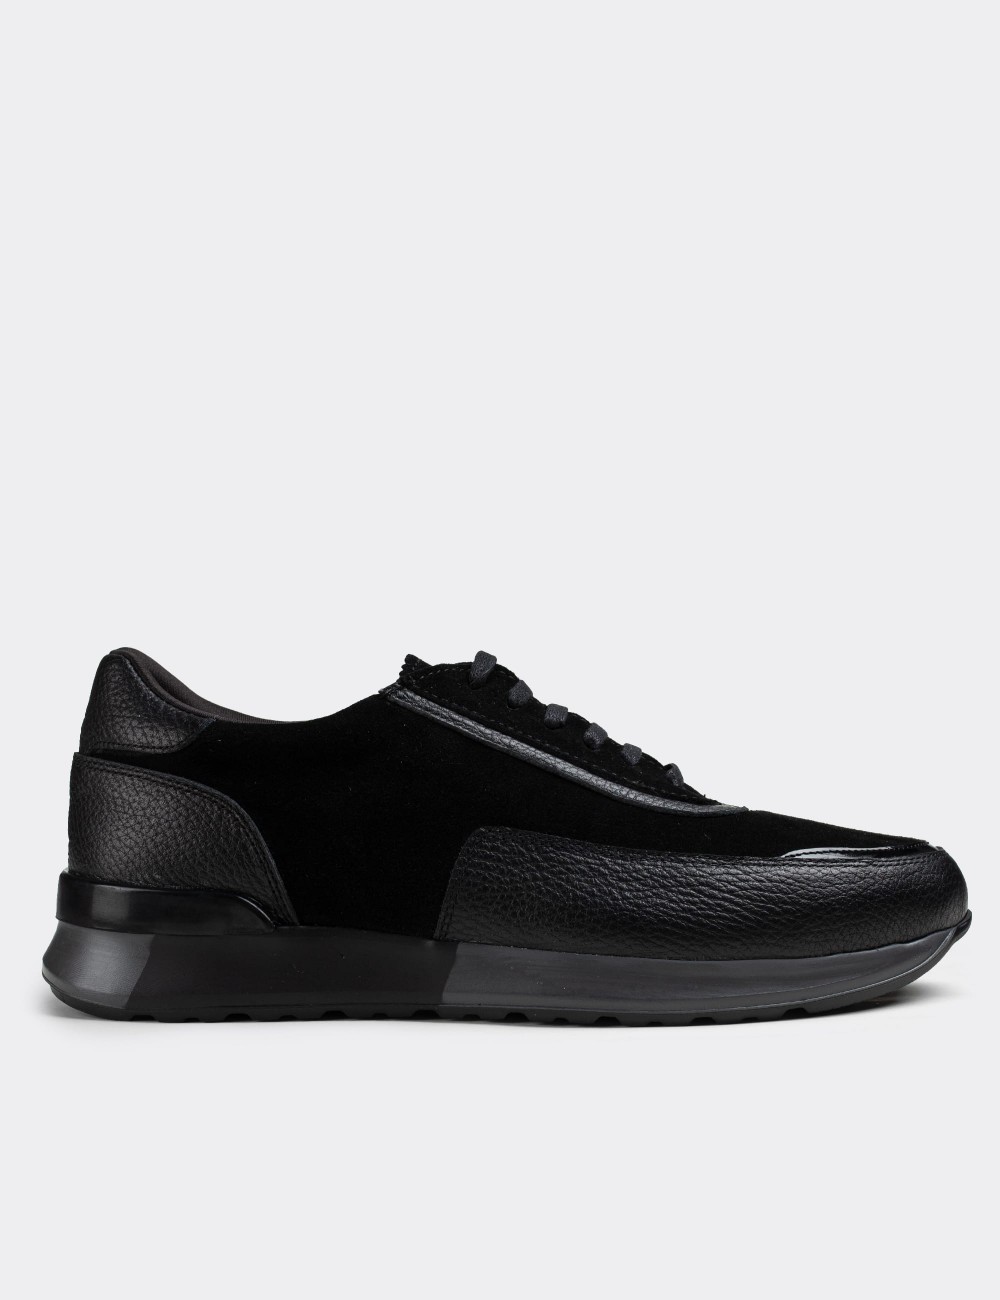 Black Suede Leather  Sneakers - 01819MSYHE01